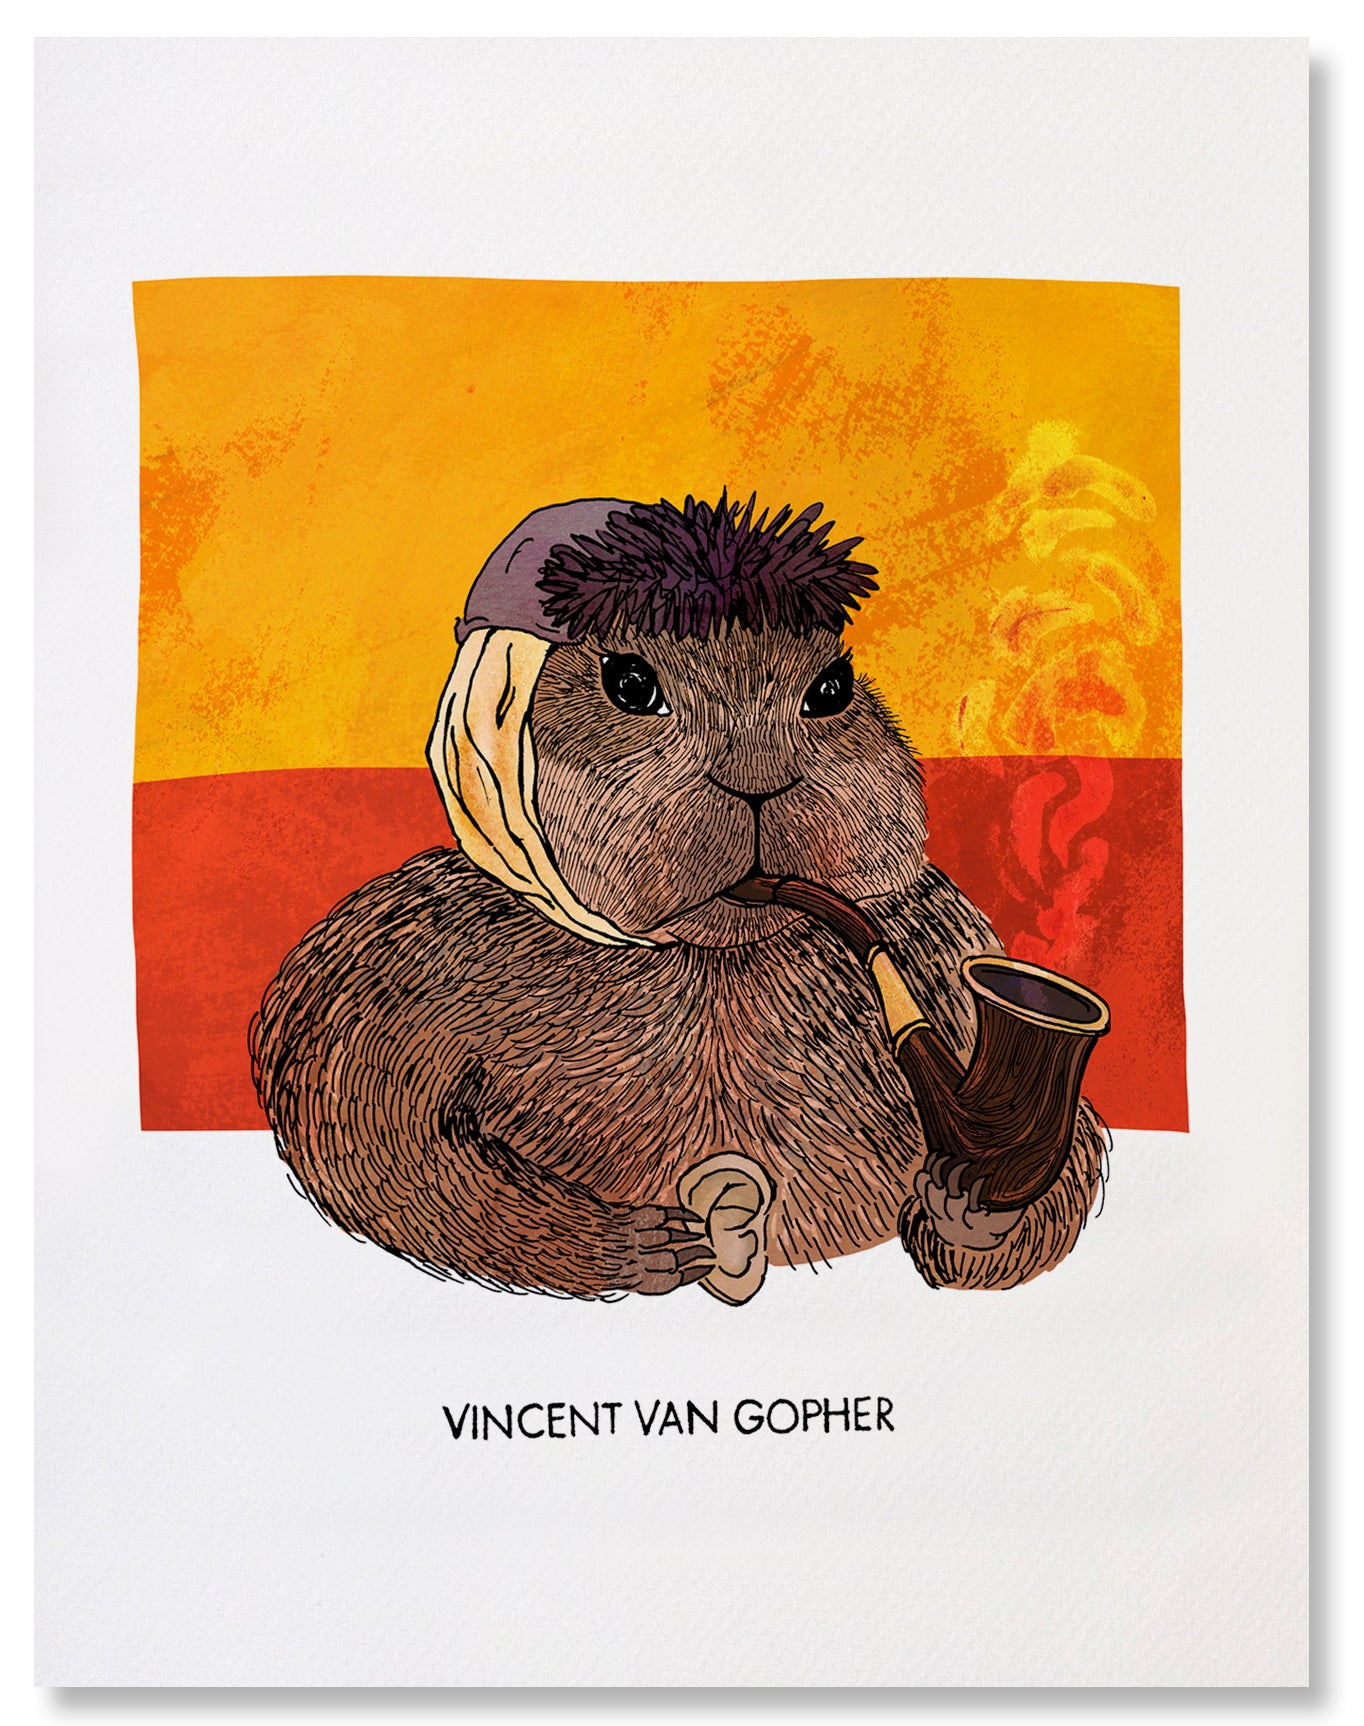 The Vincent van Gopher fine art print depicts Vincent van Gogh as a gopher. The gopher is facing the right, wearing a grey blue winter hat, and has a bandaged ear. He is holding a wooden smoking pipe in his left paw with hints of smoke coming up and holding a human ear in his right paw, a nod to van Gogh cutting off his ear. The background has two horizontal blocks of swirly colors, yellow on top of red. 